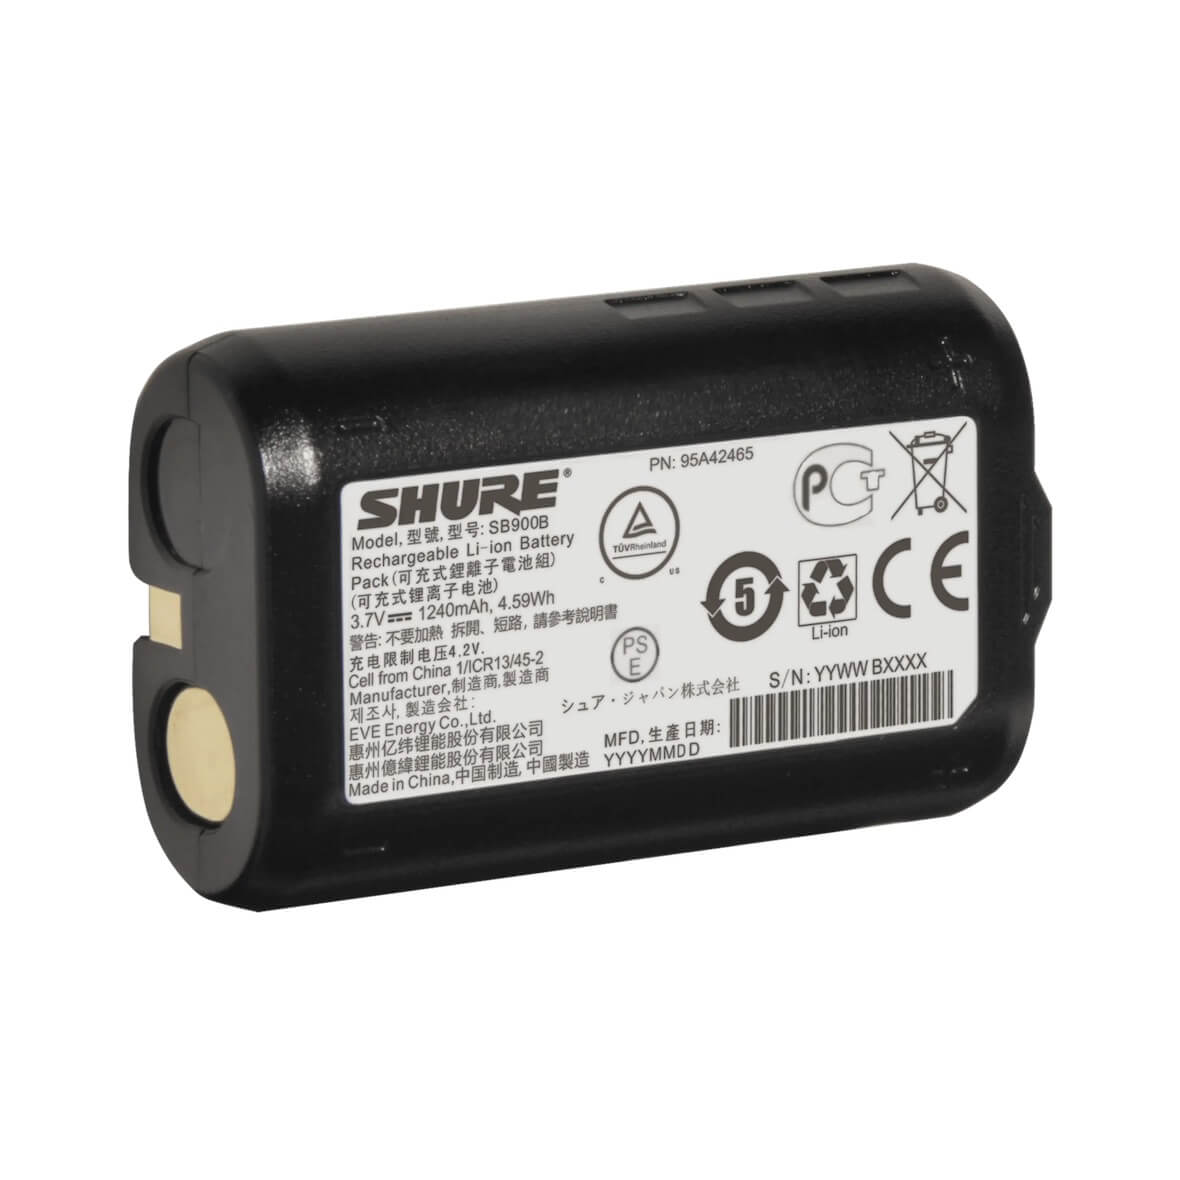 Shure SB900B - Lithium-Ion Rechargeable Battery, back